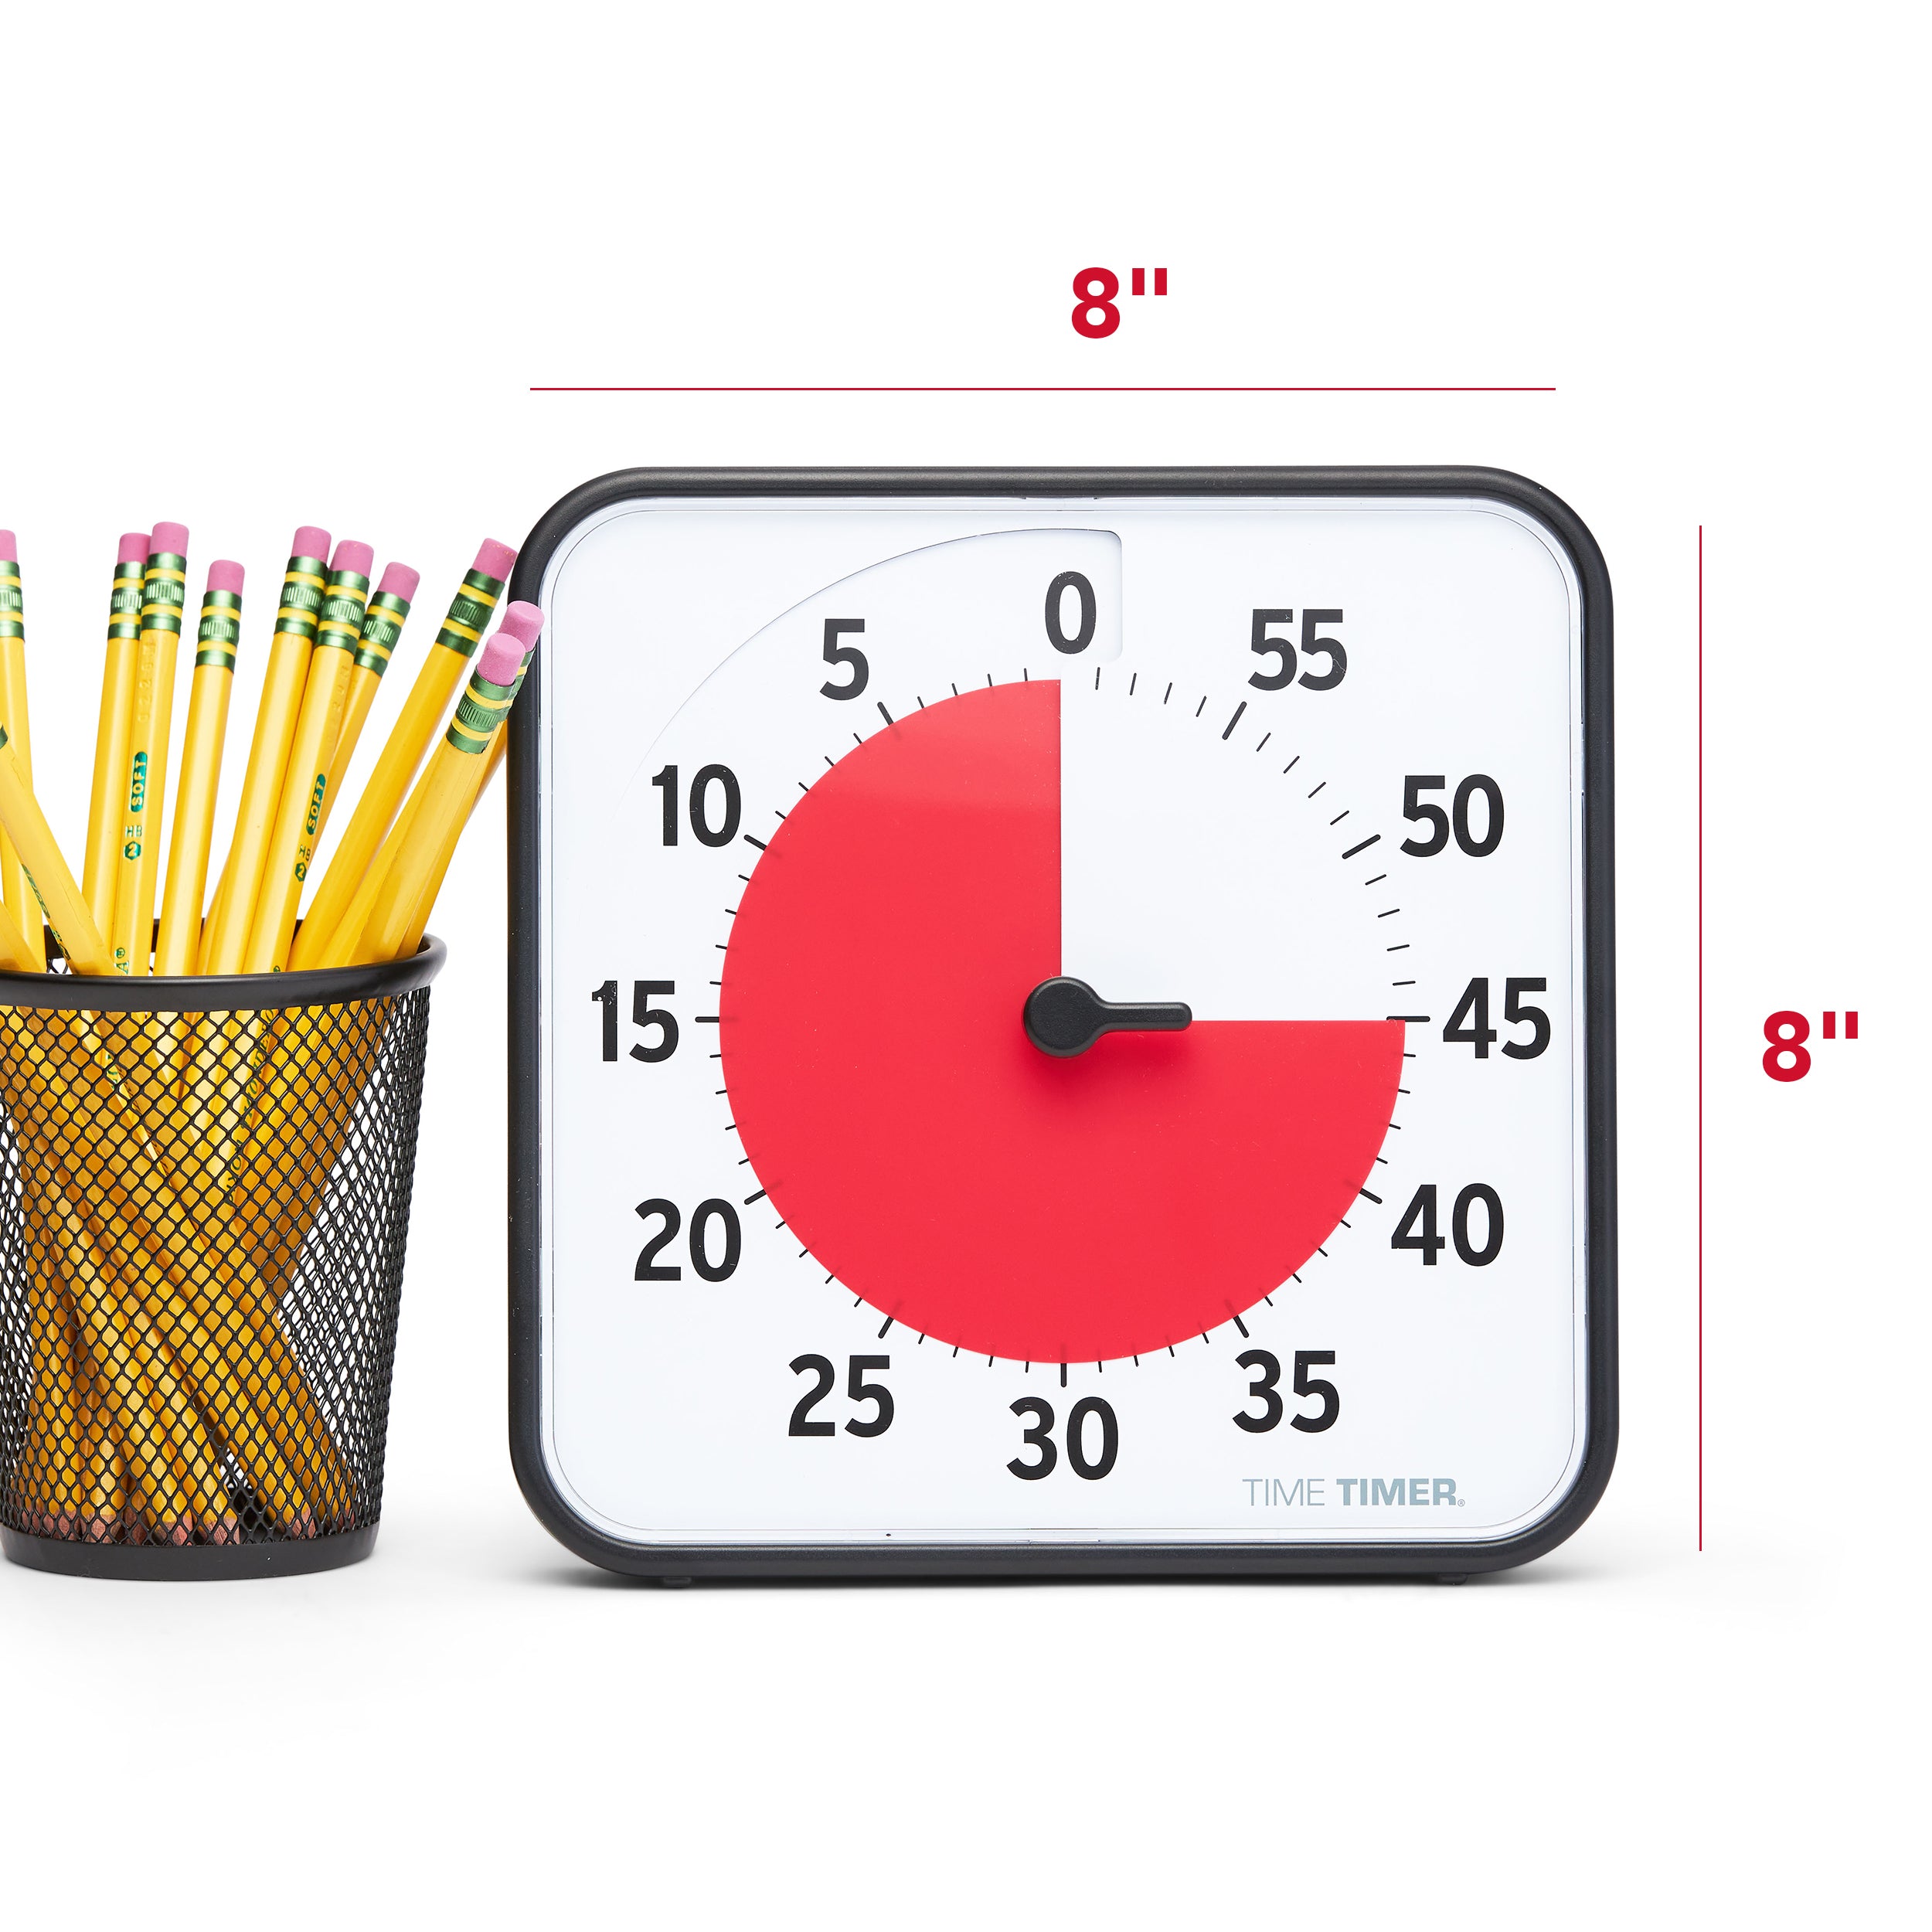 Time Original 8” 60 minute Visual Timer for The Classroom